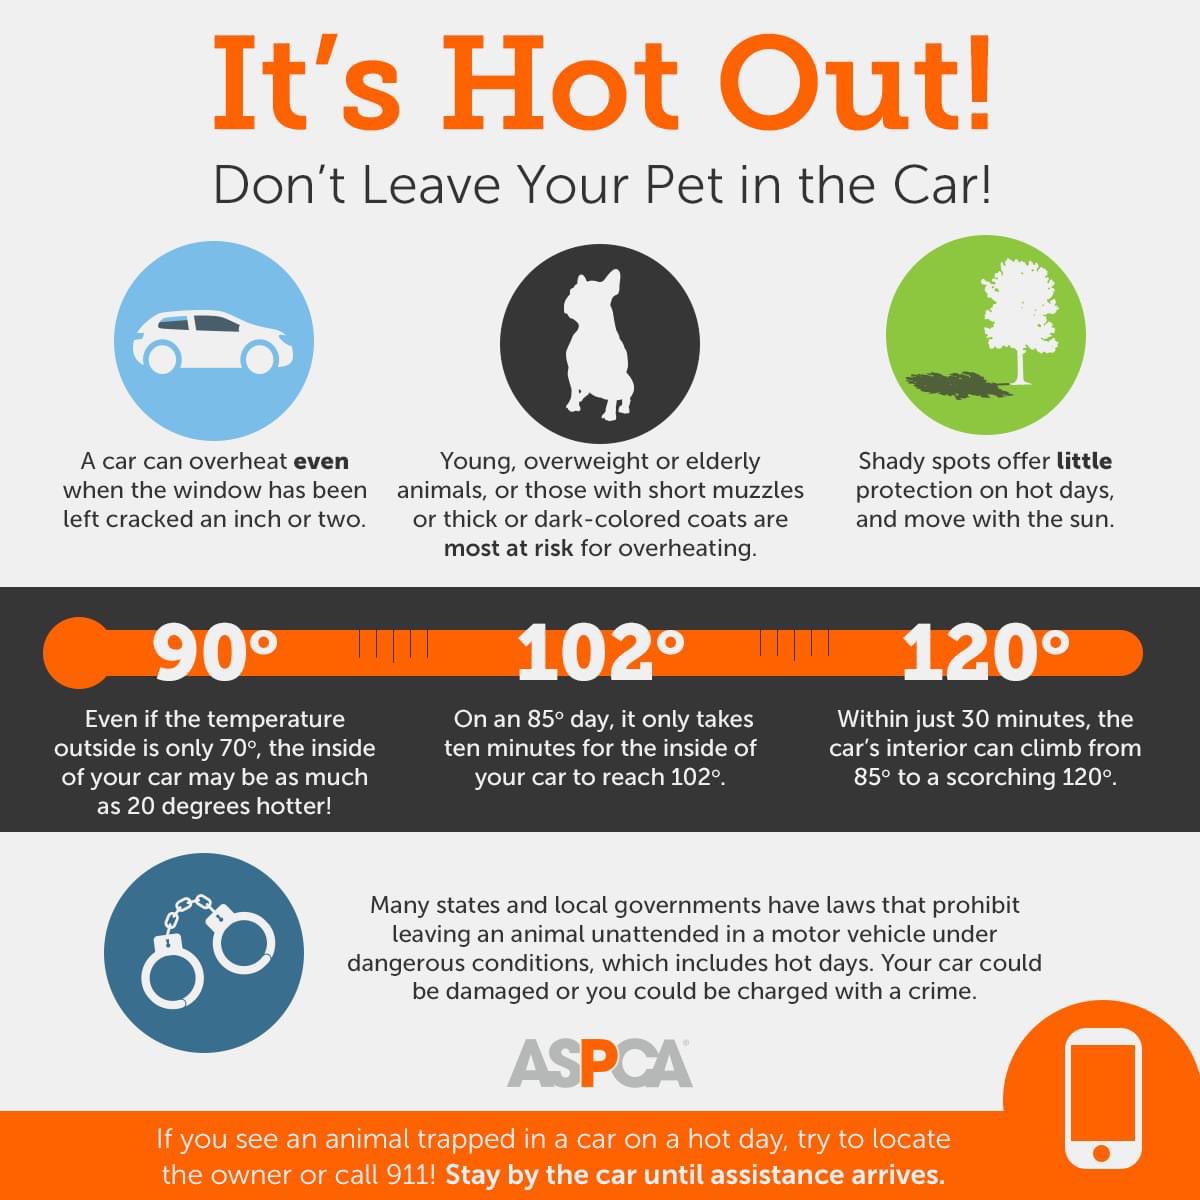 It’s getting hot in our area! Please take care of your four legged family members during this extreme weather. #caheatwave #elkgroveca #sacramentoca #petslife #petsafety